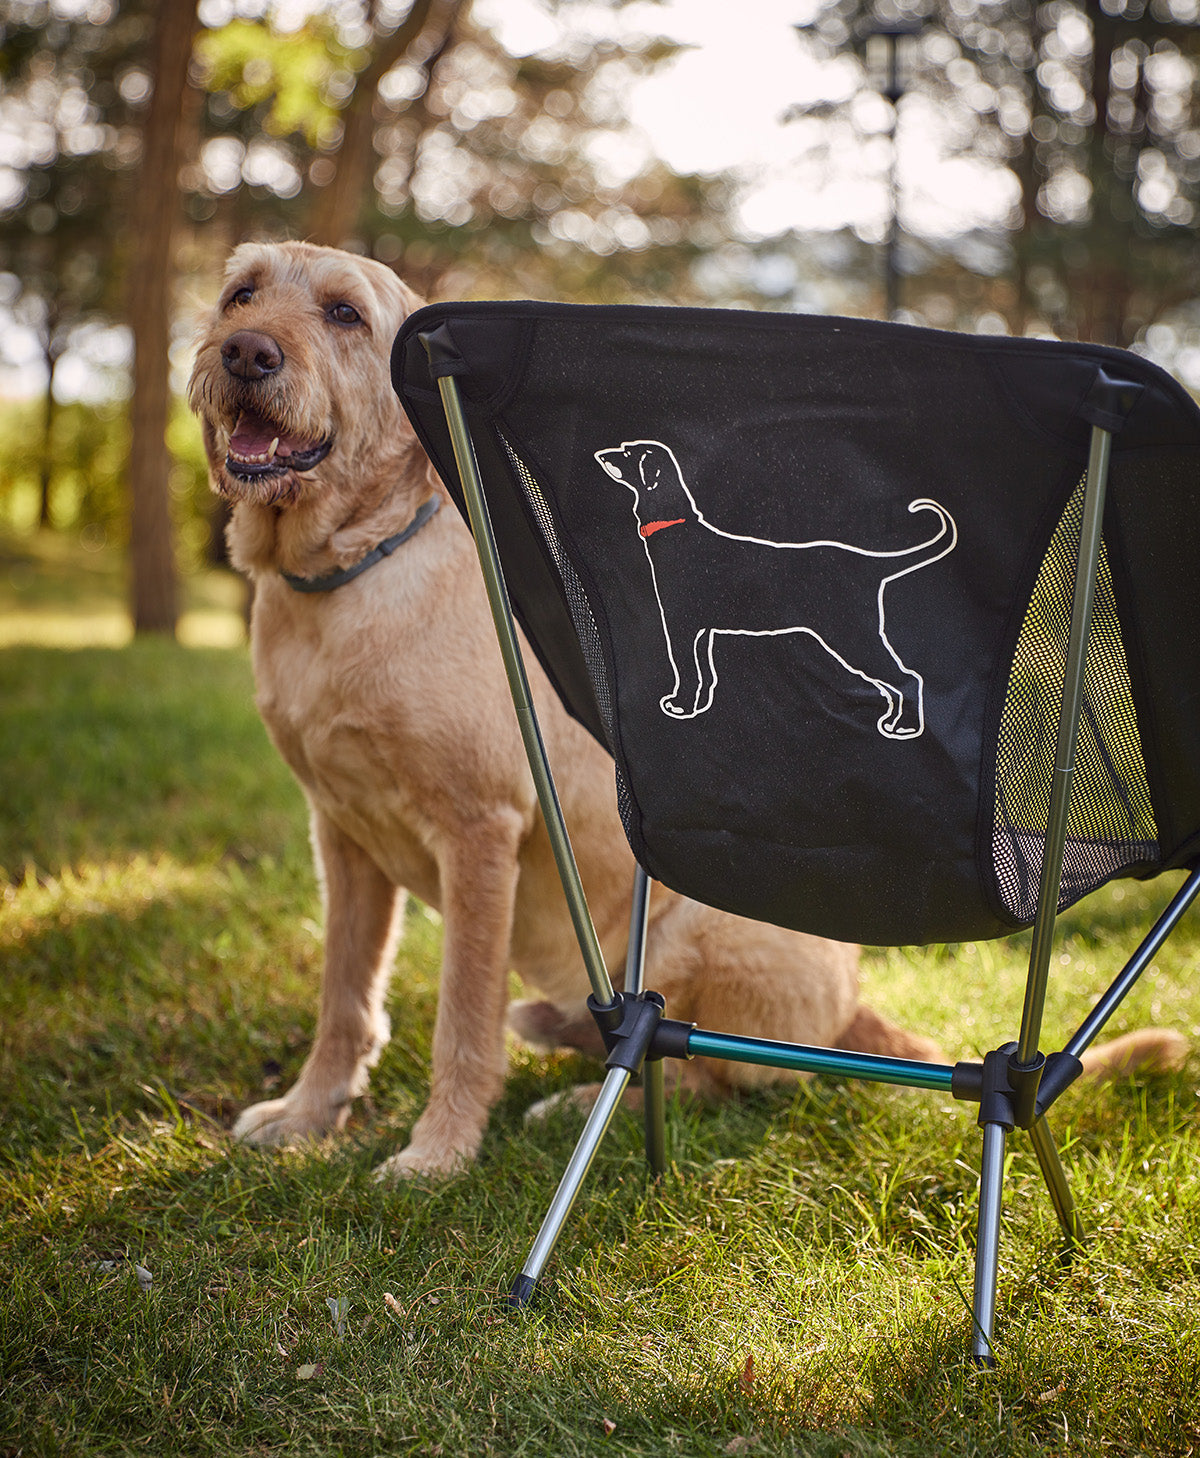 The Black Dog Foldable Portable Chair